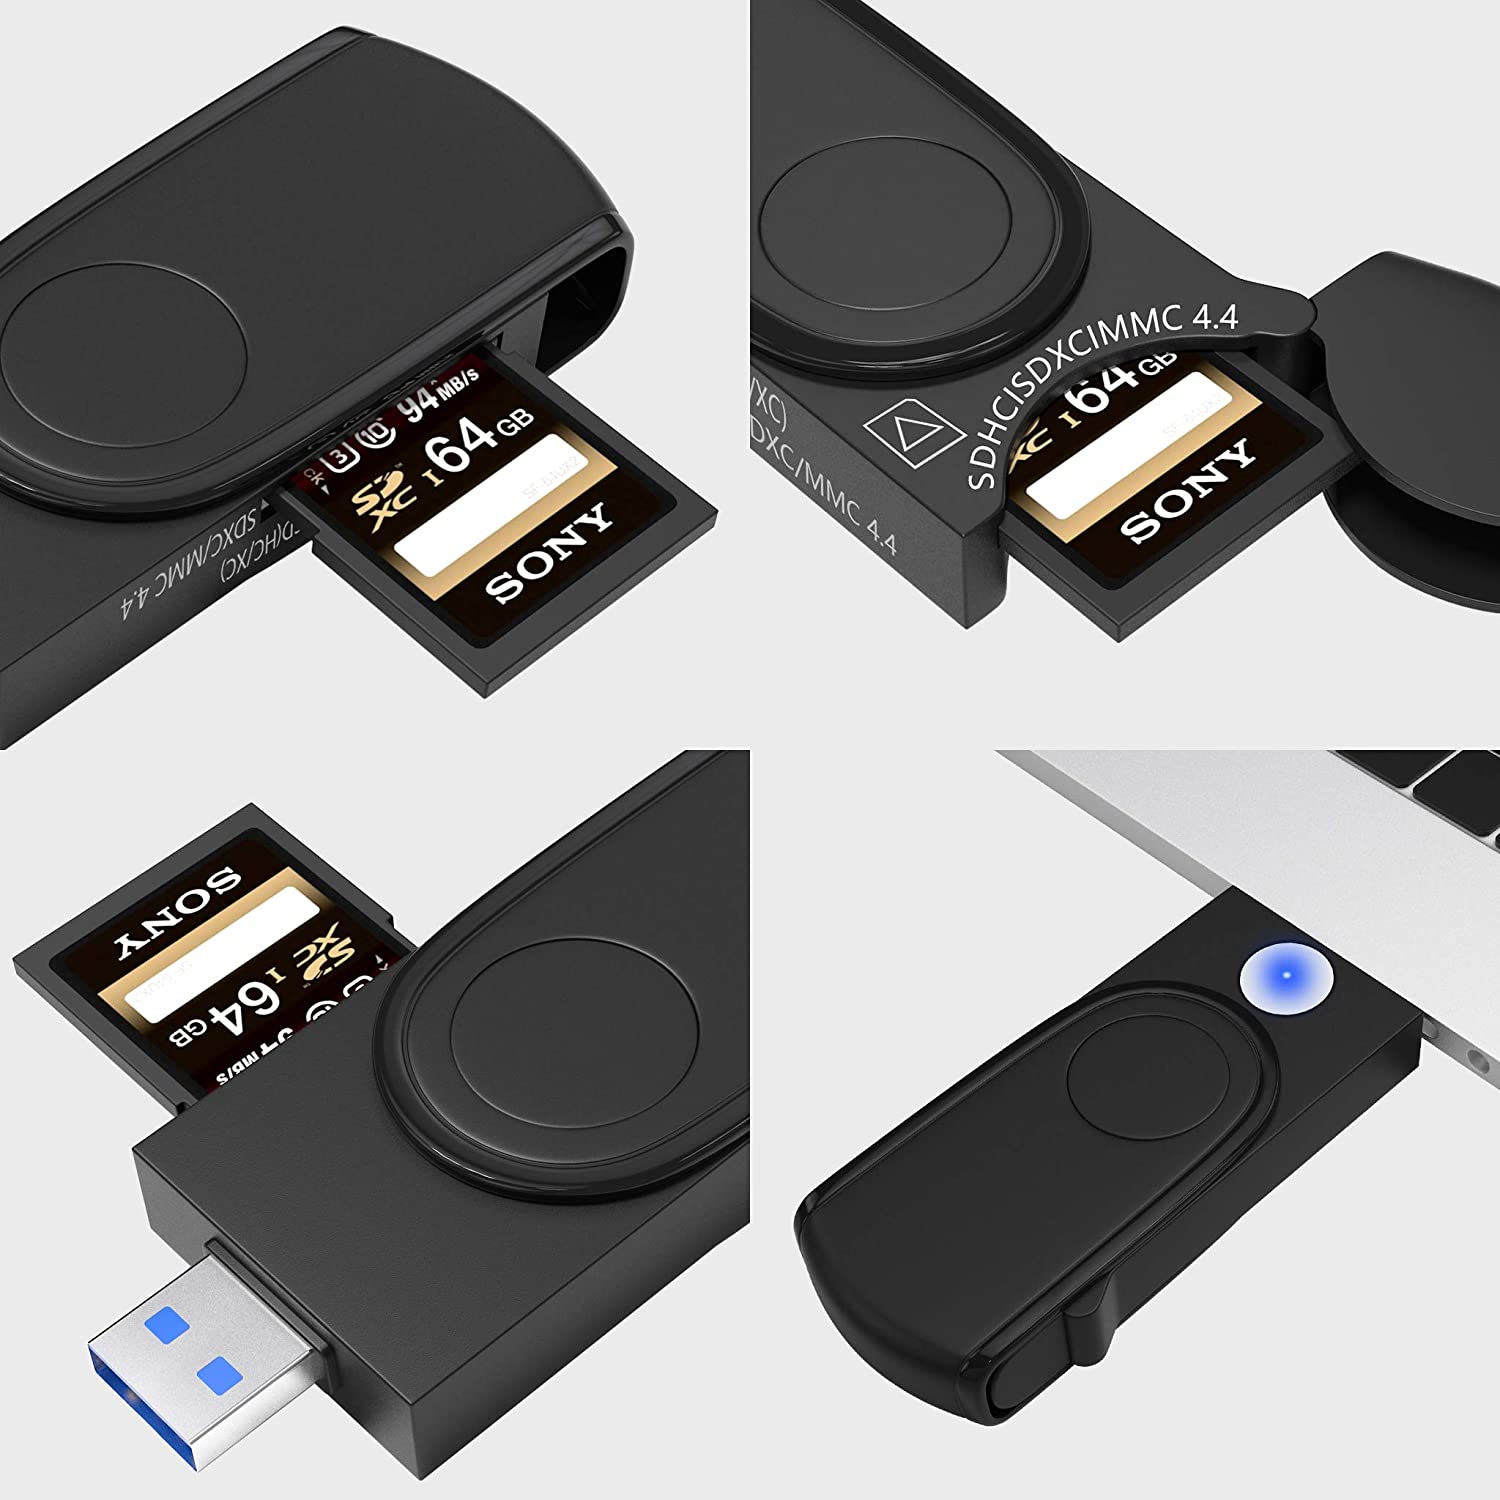 SD Card + Micro SD Card Cateck 4 in 1 USB 3.0 Memory Card Reader//Writer with a Build-in Card Cover and 4 Slots for SDXC Micro SD Micro SDHC Micro SDXC UHS-I SD SD MMC Memory Cards SDHC